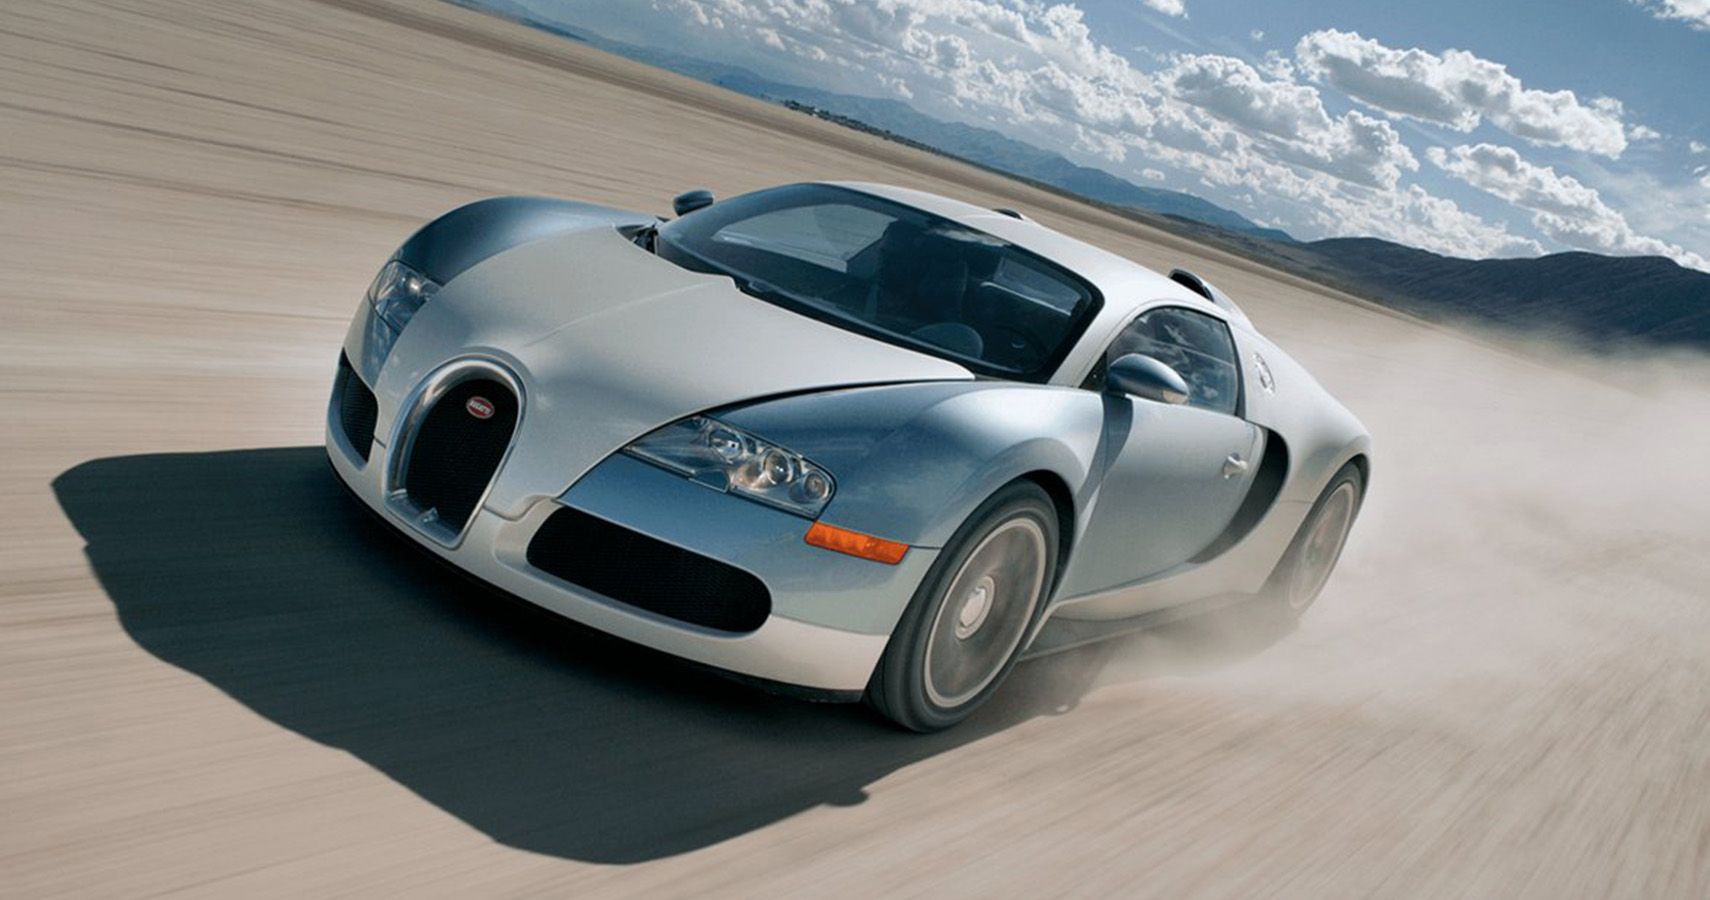 The 2005 Bugatti Veyron Was A Sensation Bearing An 8.0-Liter Quad-Turbocharged W16 Engine, Basically Equal To Two Smooshed-Up V8 Engines Spliced Together